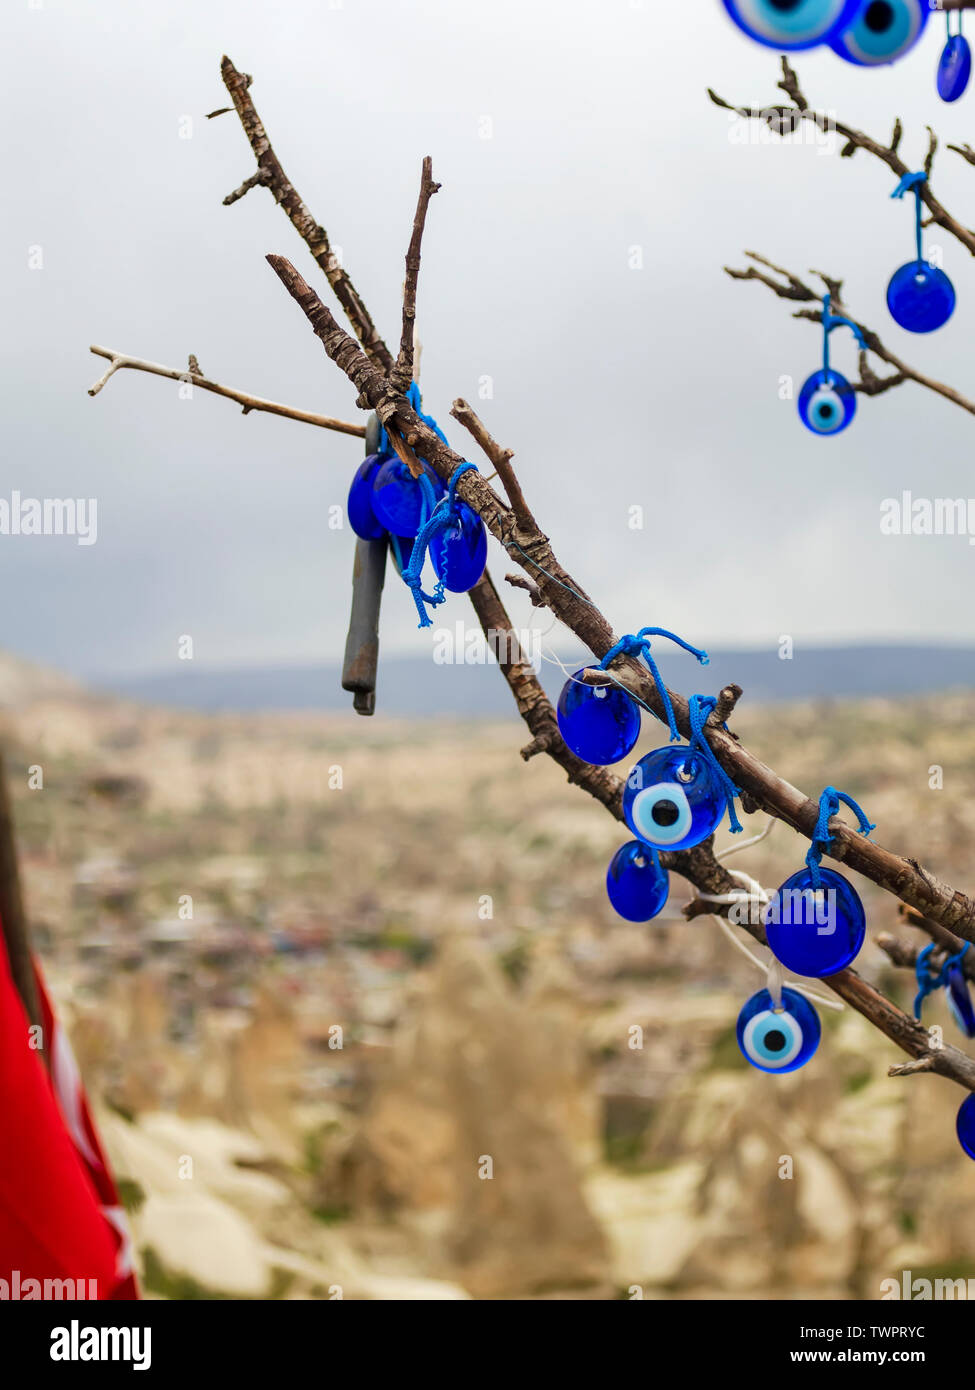 Many traditional Turkish amulets - Nazar boncuk or Fatima Eye hang on the branches of a wishes tree Stock Photo